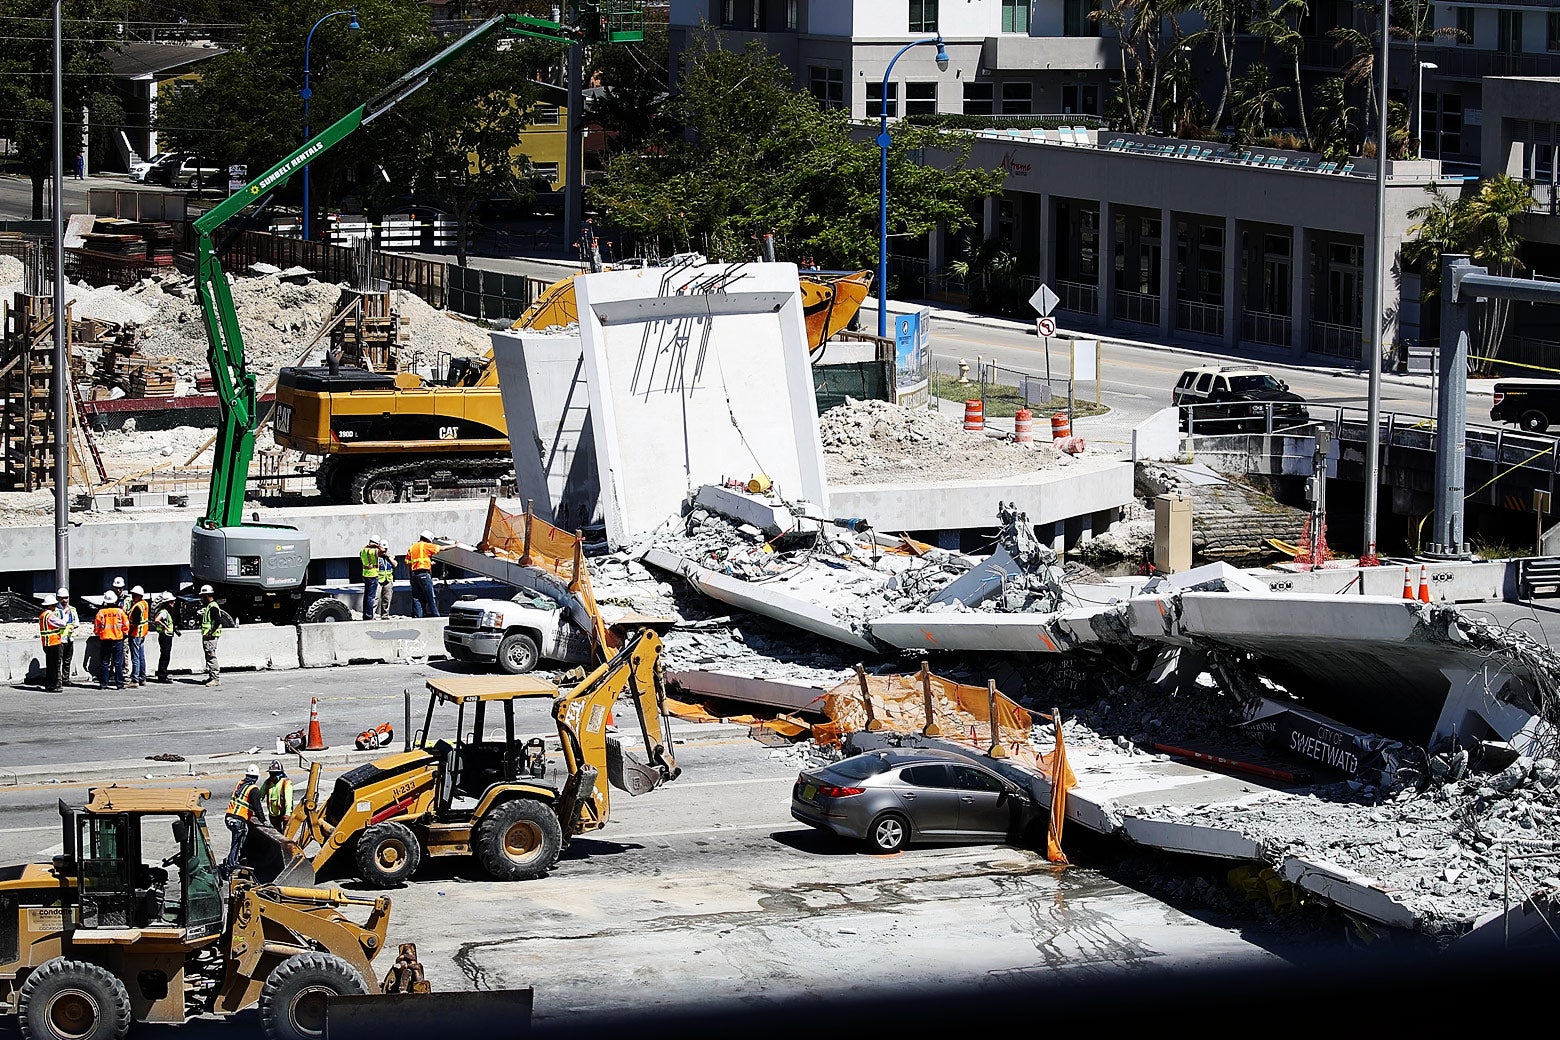 Law enforcement and members of the National Transportation Safety Board investigate the scene where a pedestrian bridge collapsed a few days in Miami, Florida.